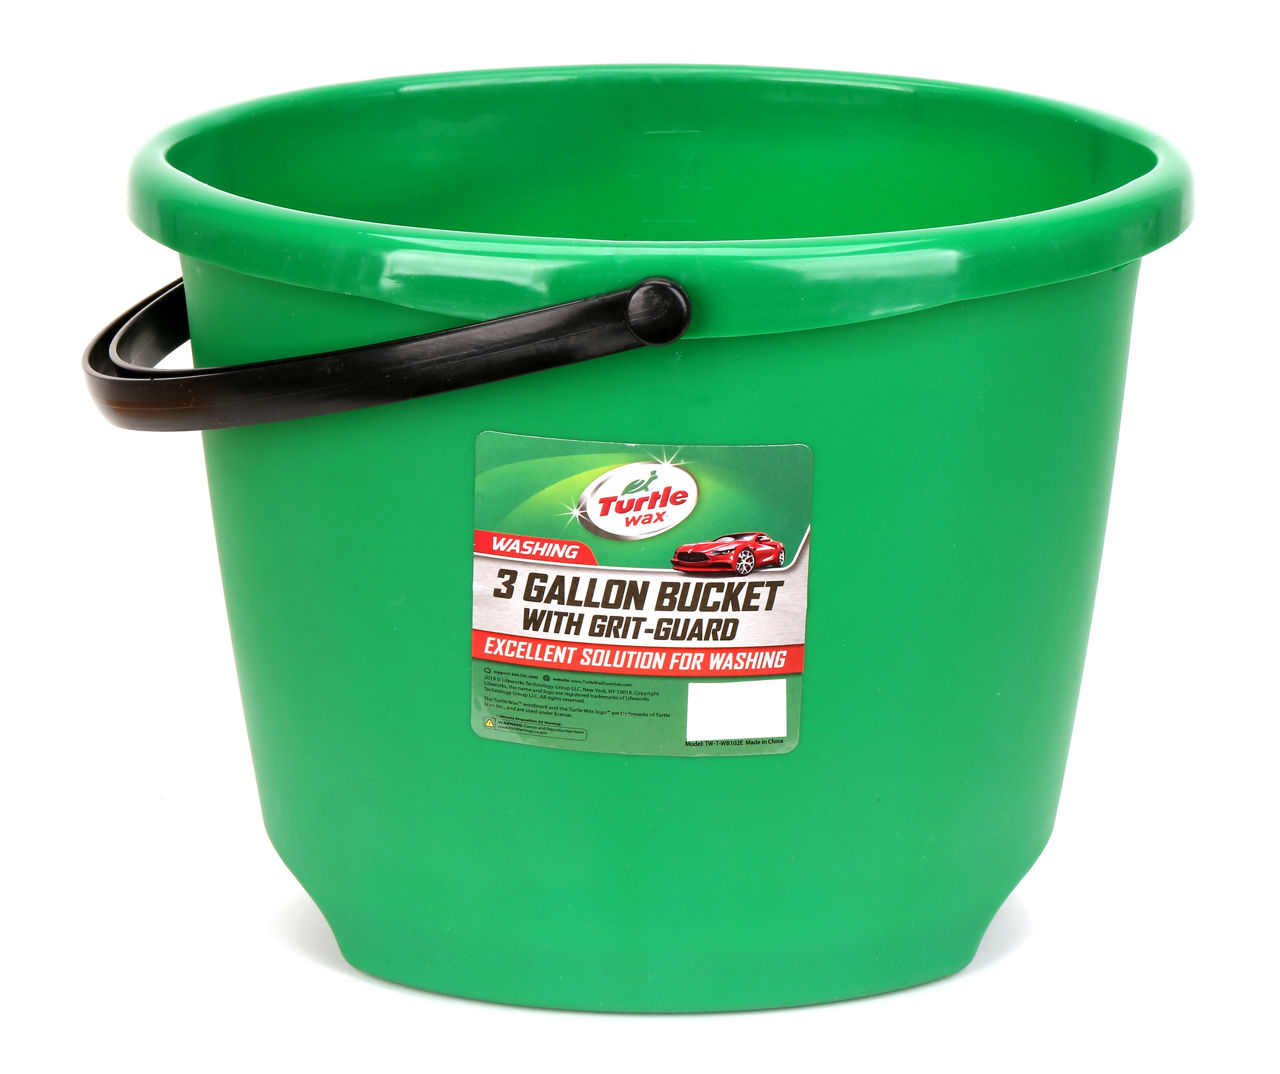 Turtle Wax Green 3-Gallon Bucket With Grit-Guard